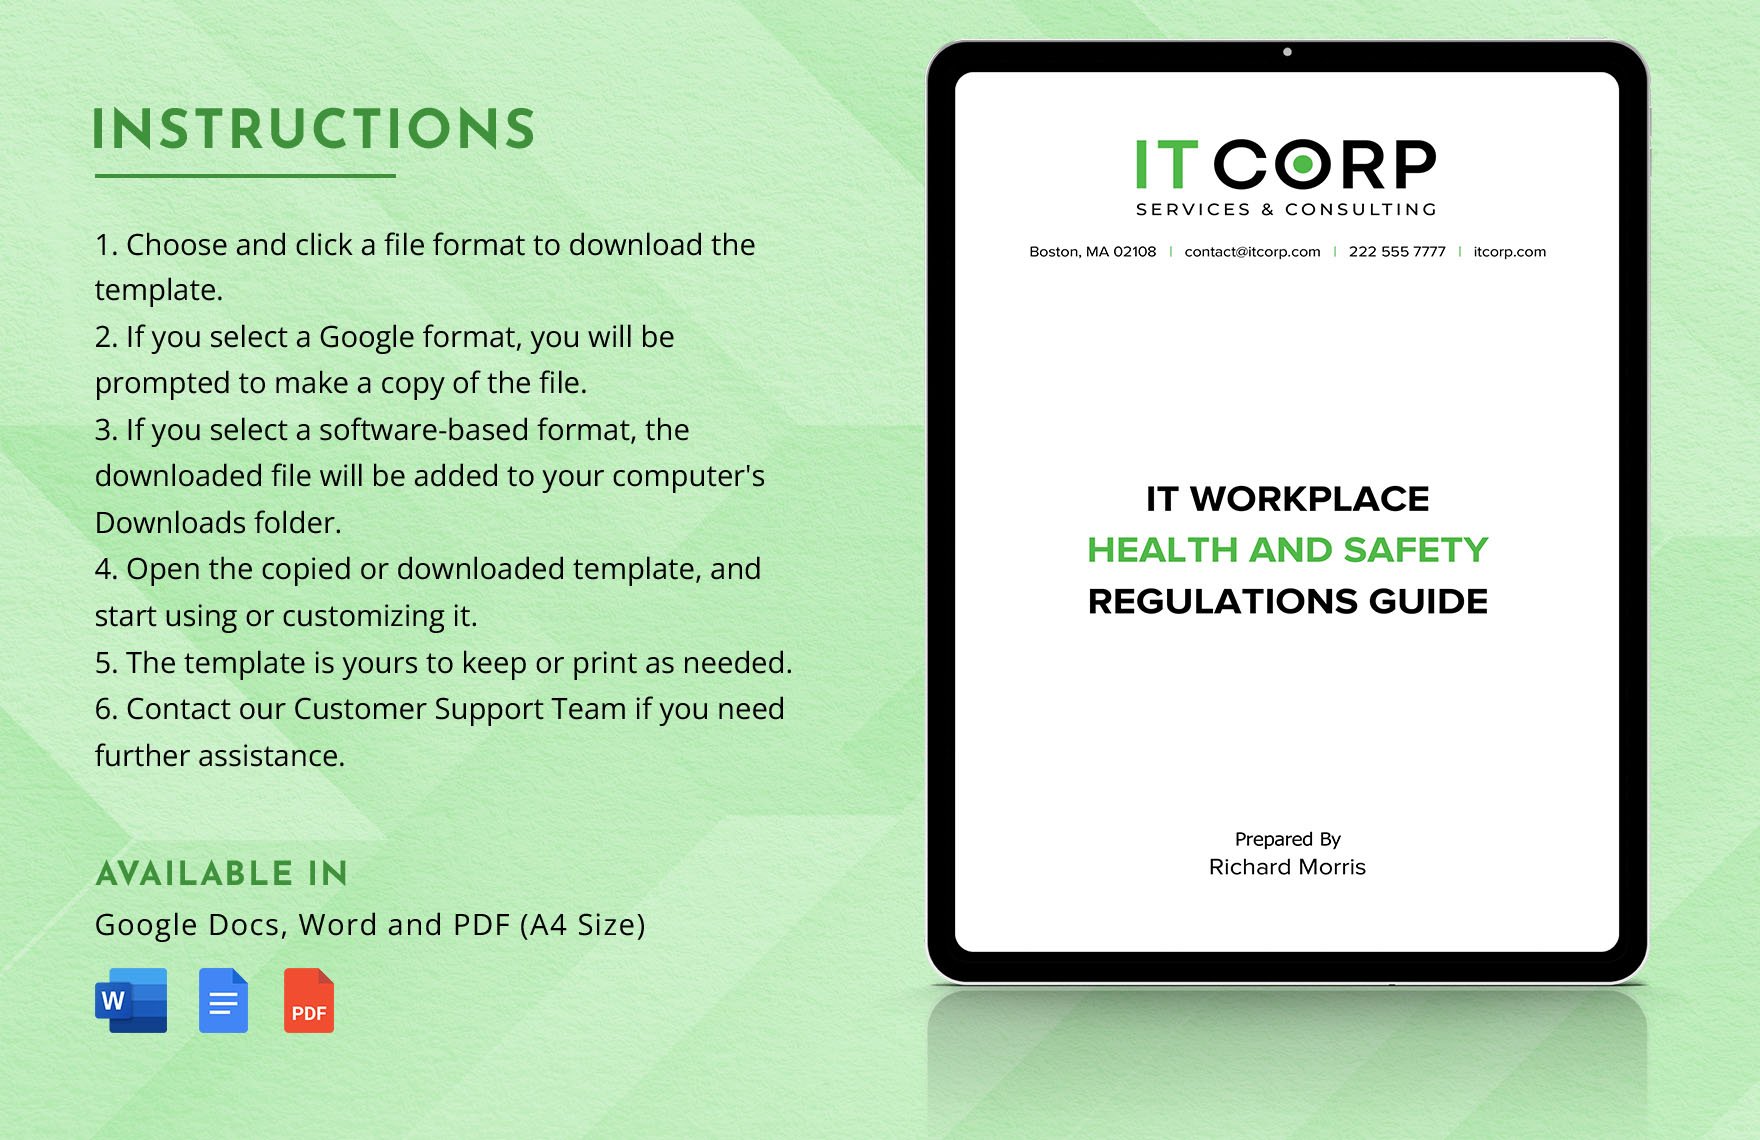 IT Workplace Health and Safety Regulations Guide Template